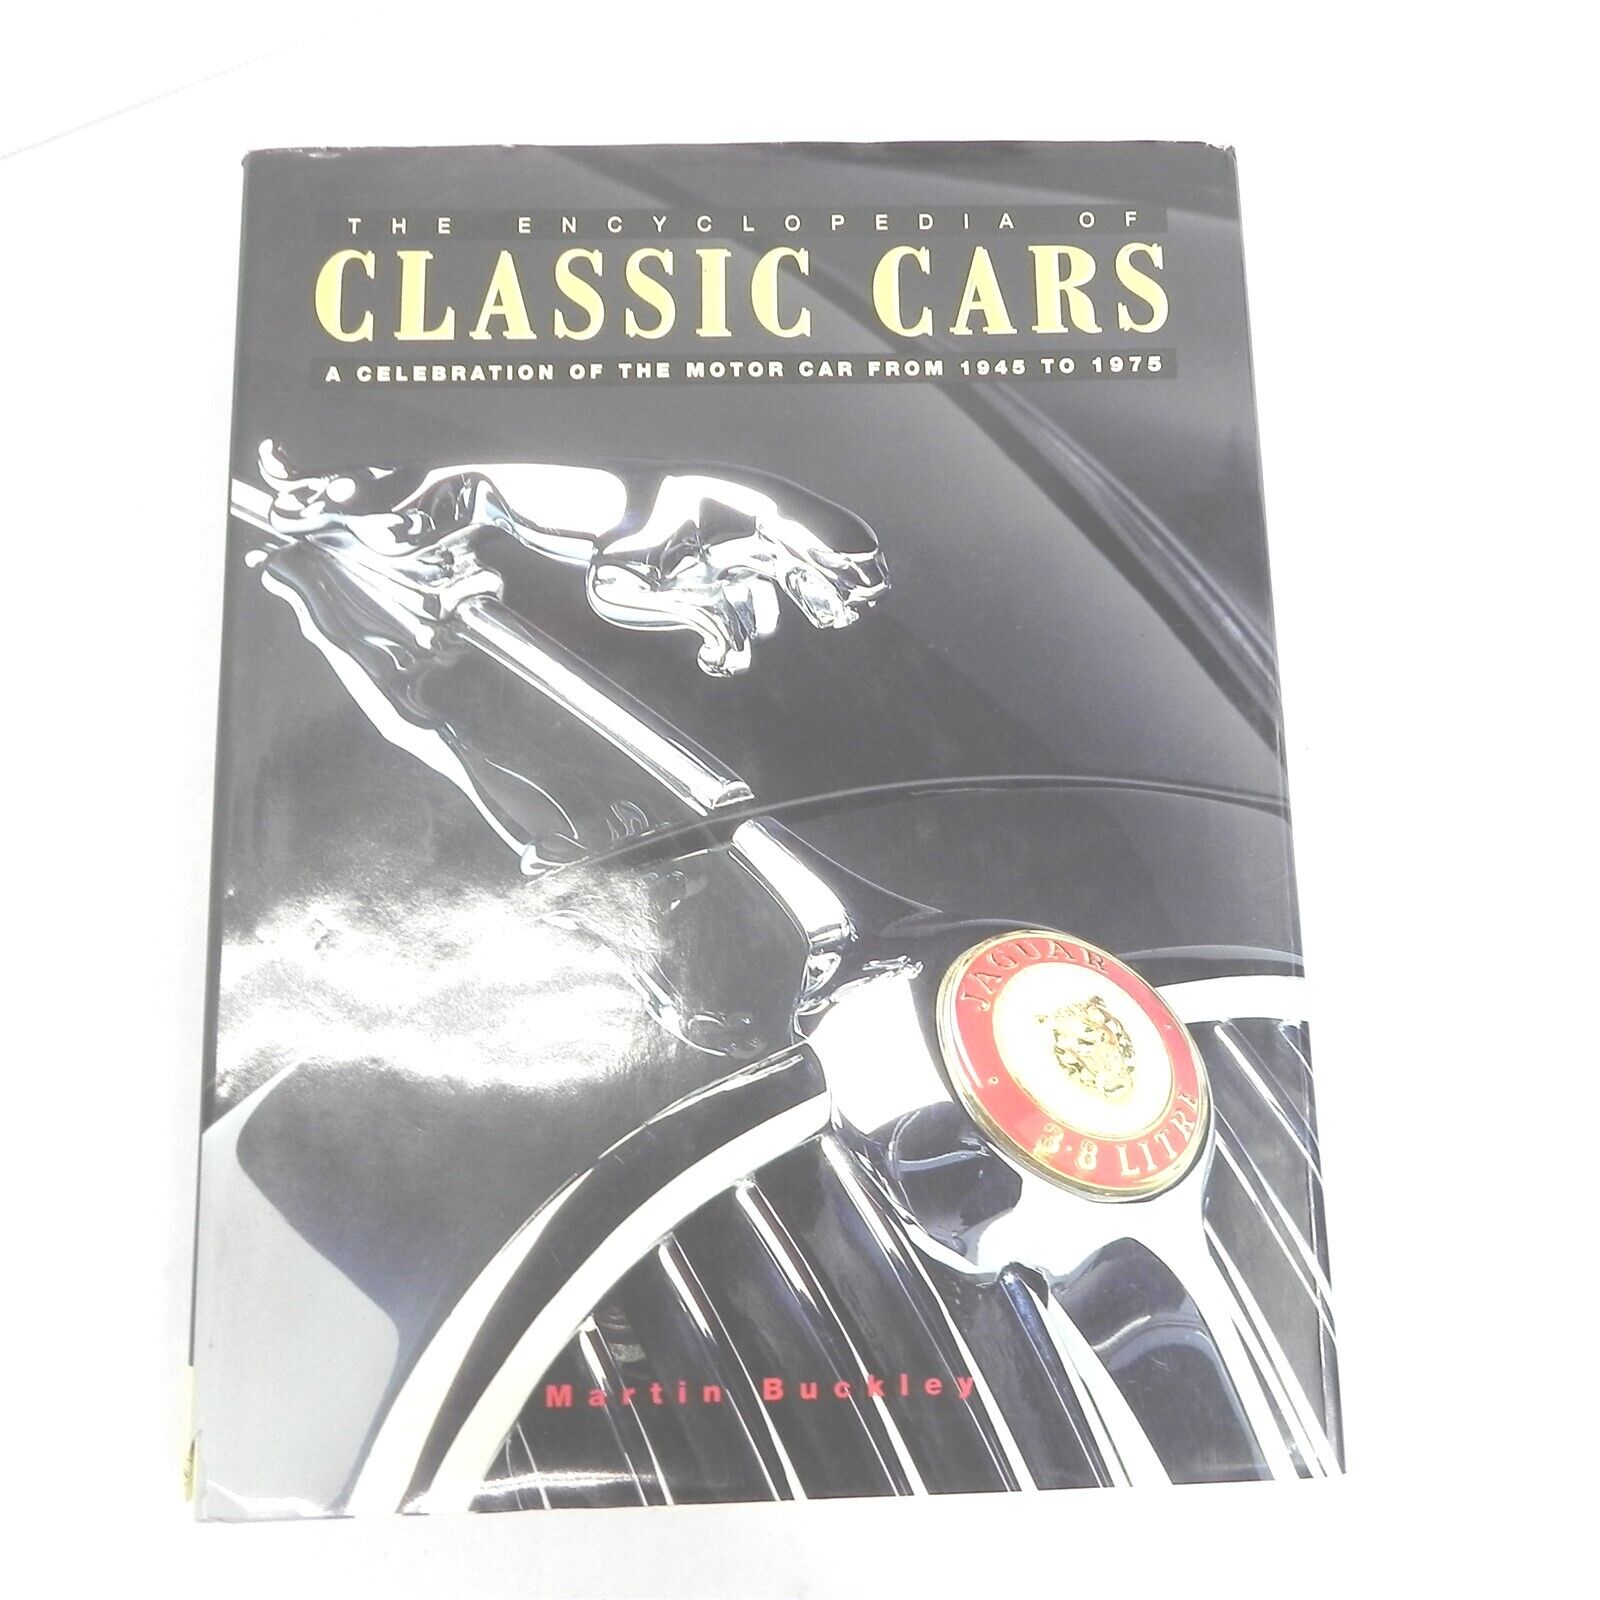 VTG 1997 THE ENCYCLOPEDIA OF CLASSIC CARS BY MARTIN BUCKLEY ANNESS PUBLISHING